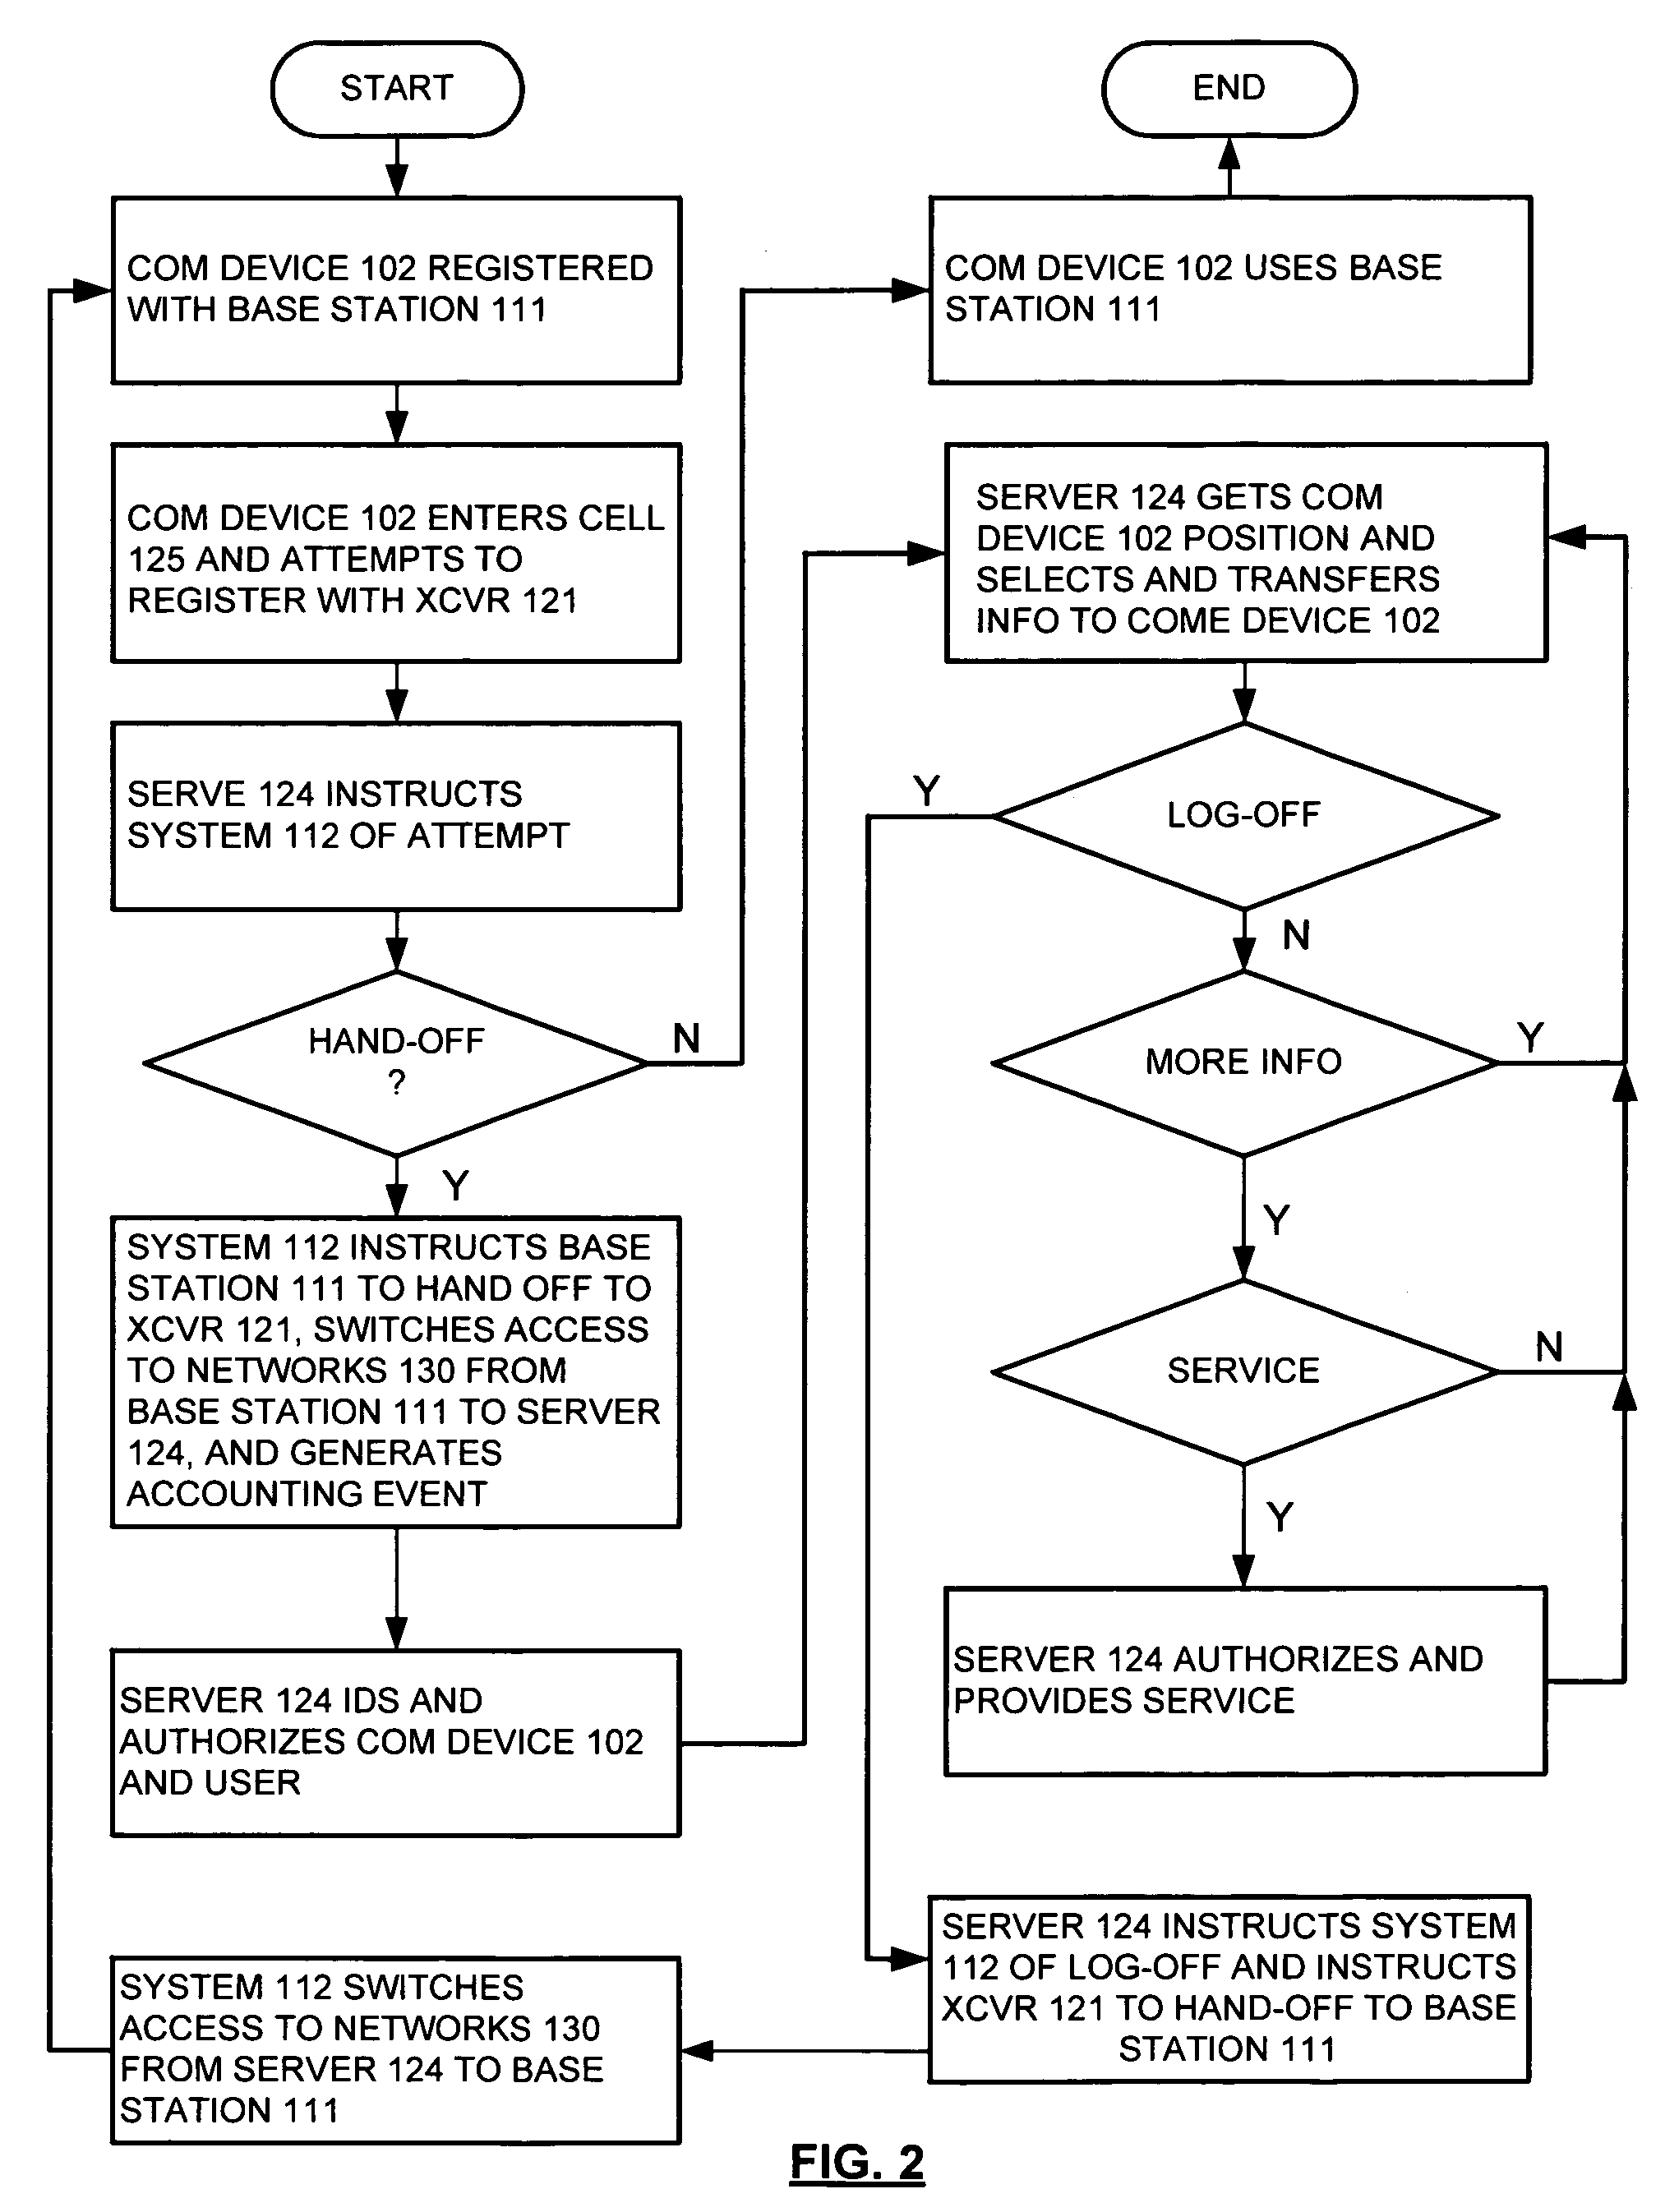 Validating a transaction with user voice authentication using wireless communications